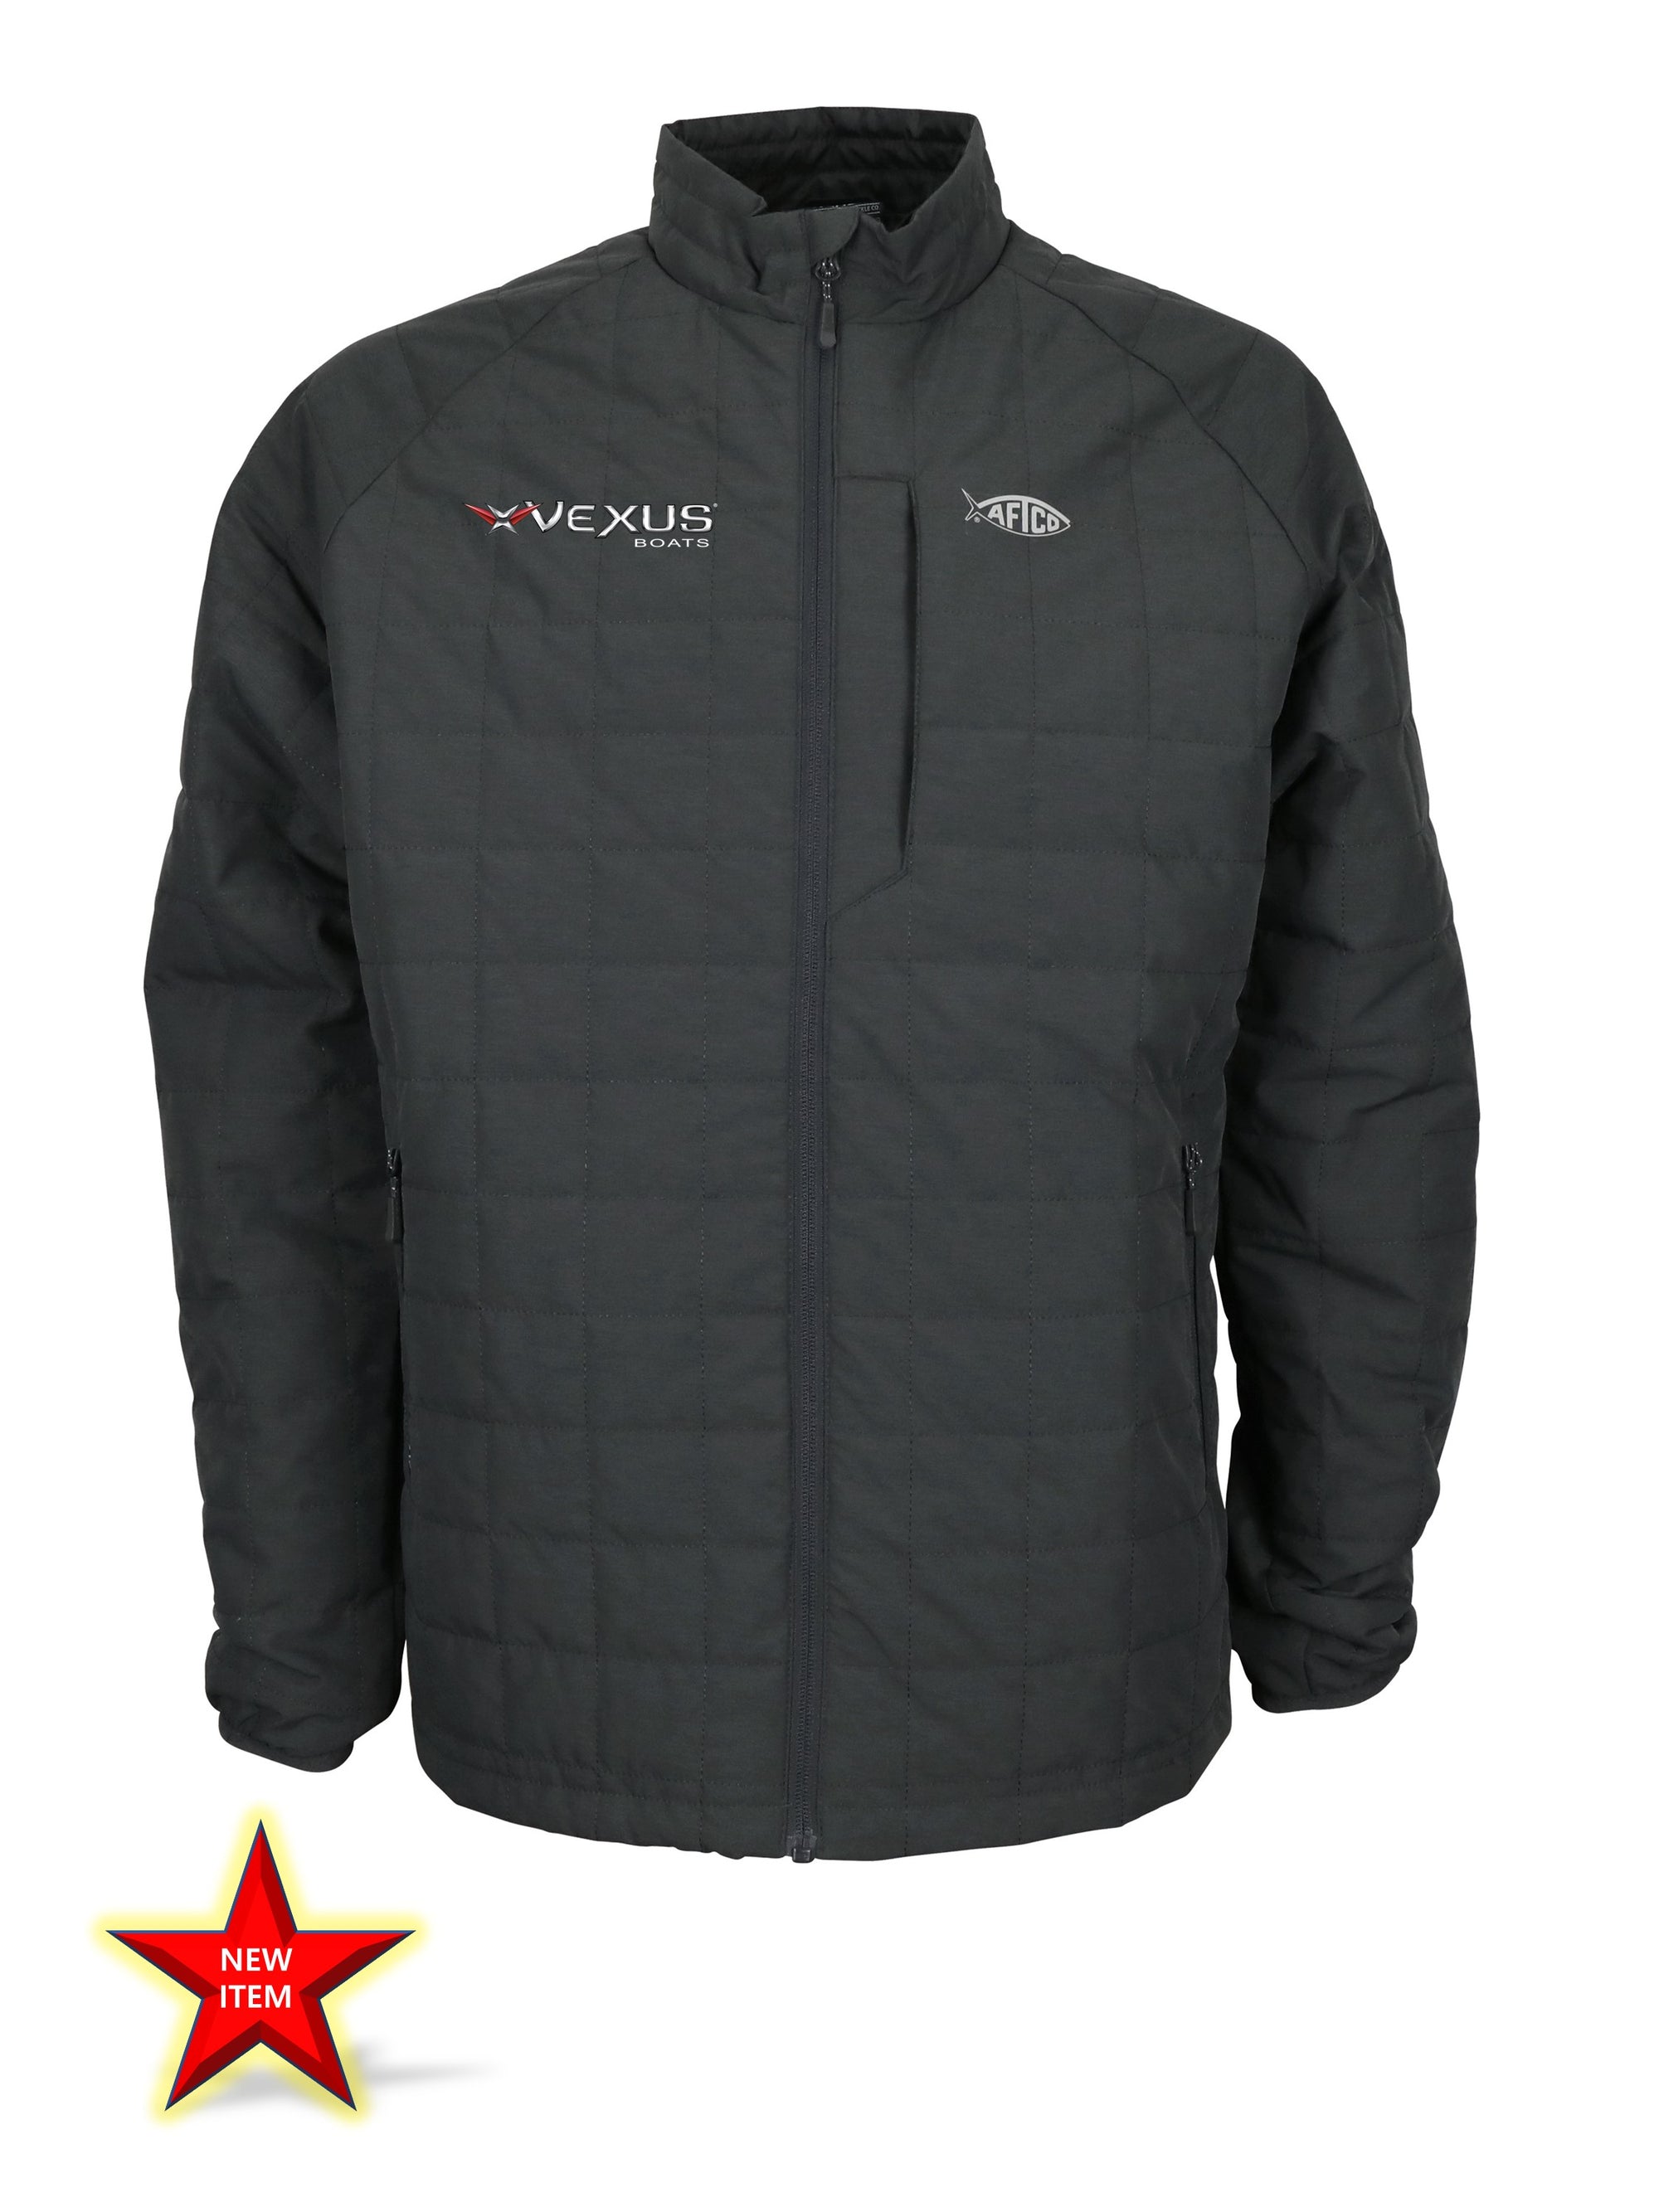 VEXUS® / AFTCO Charcoal Pufferfish Jacket